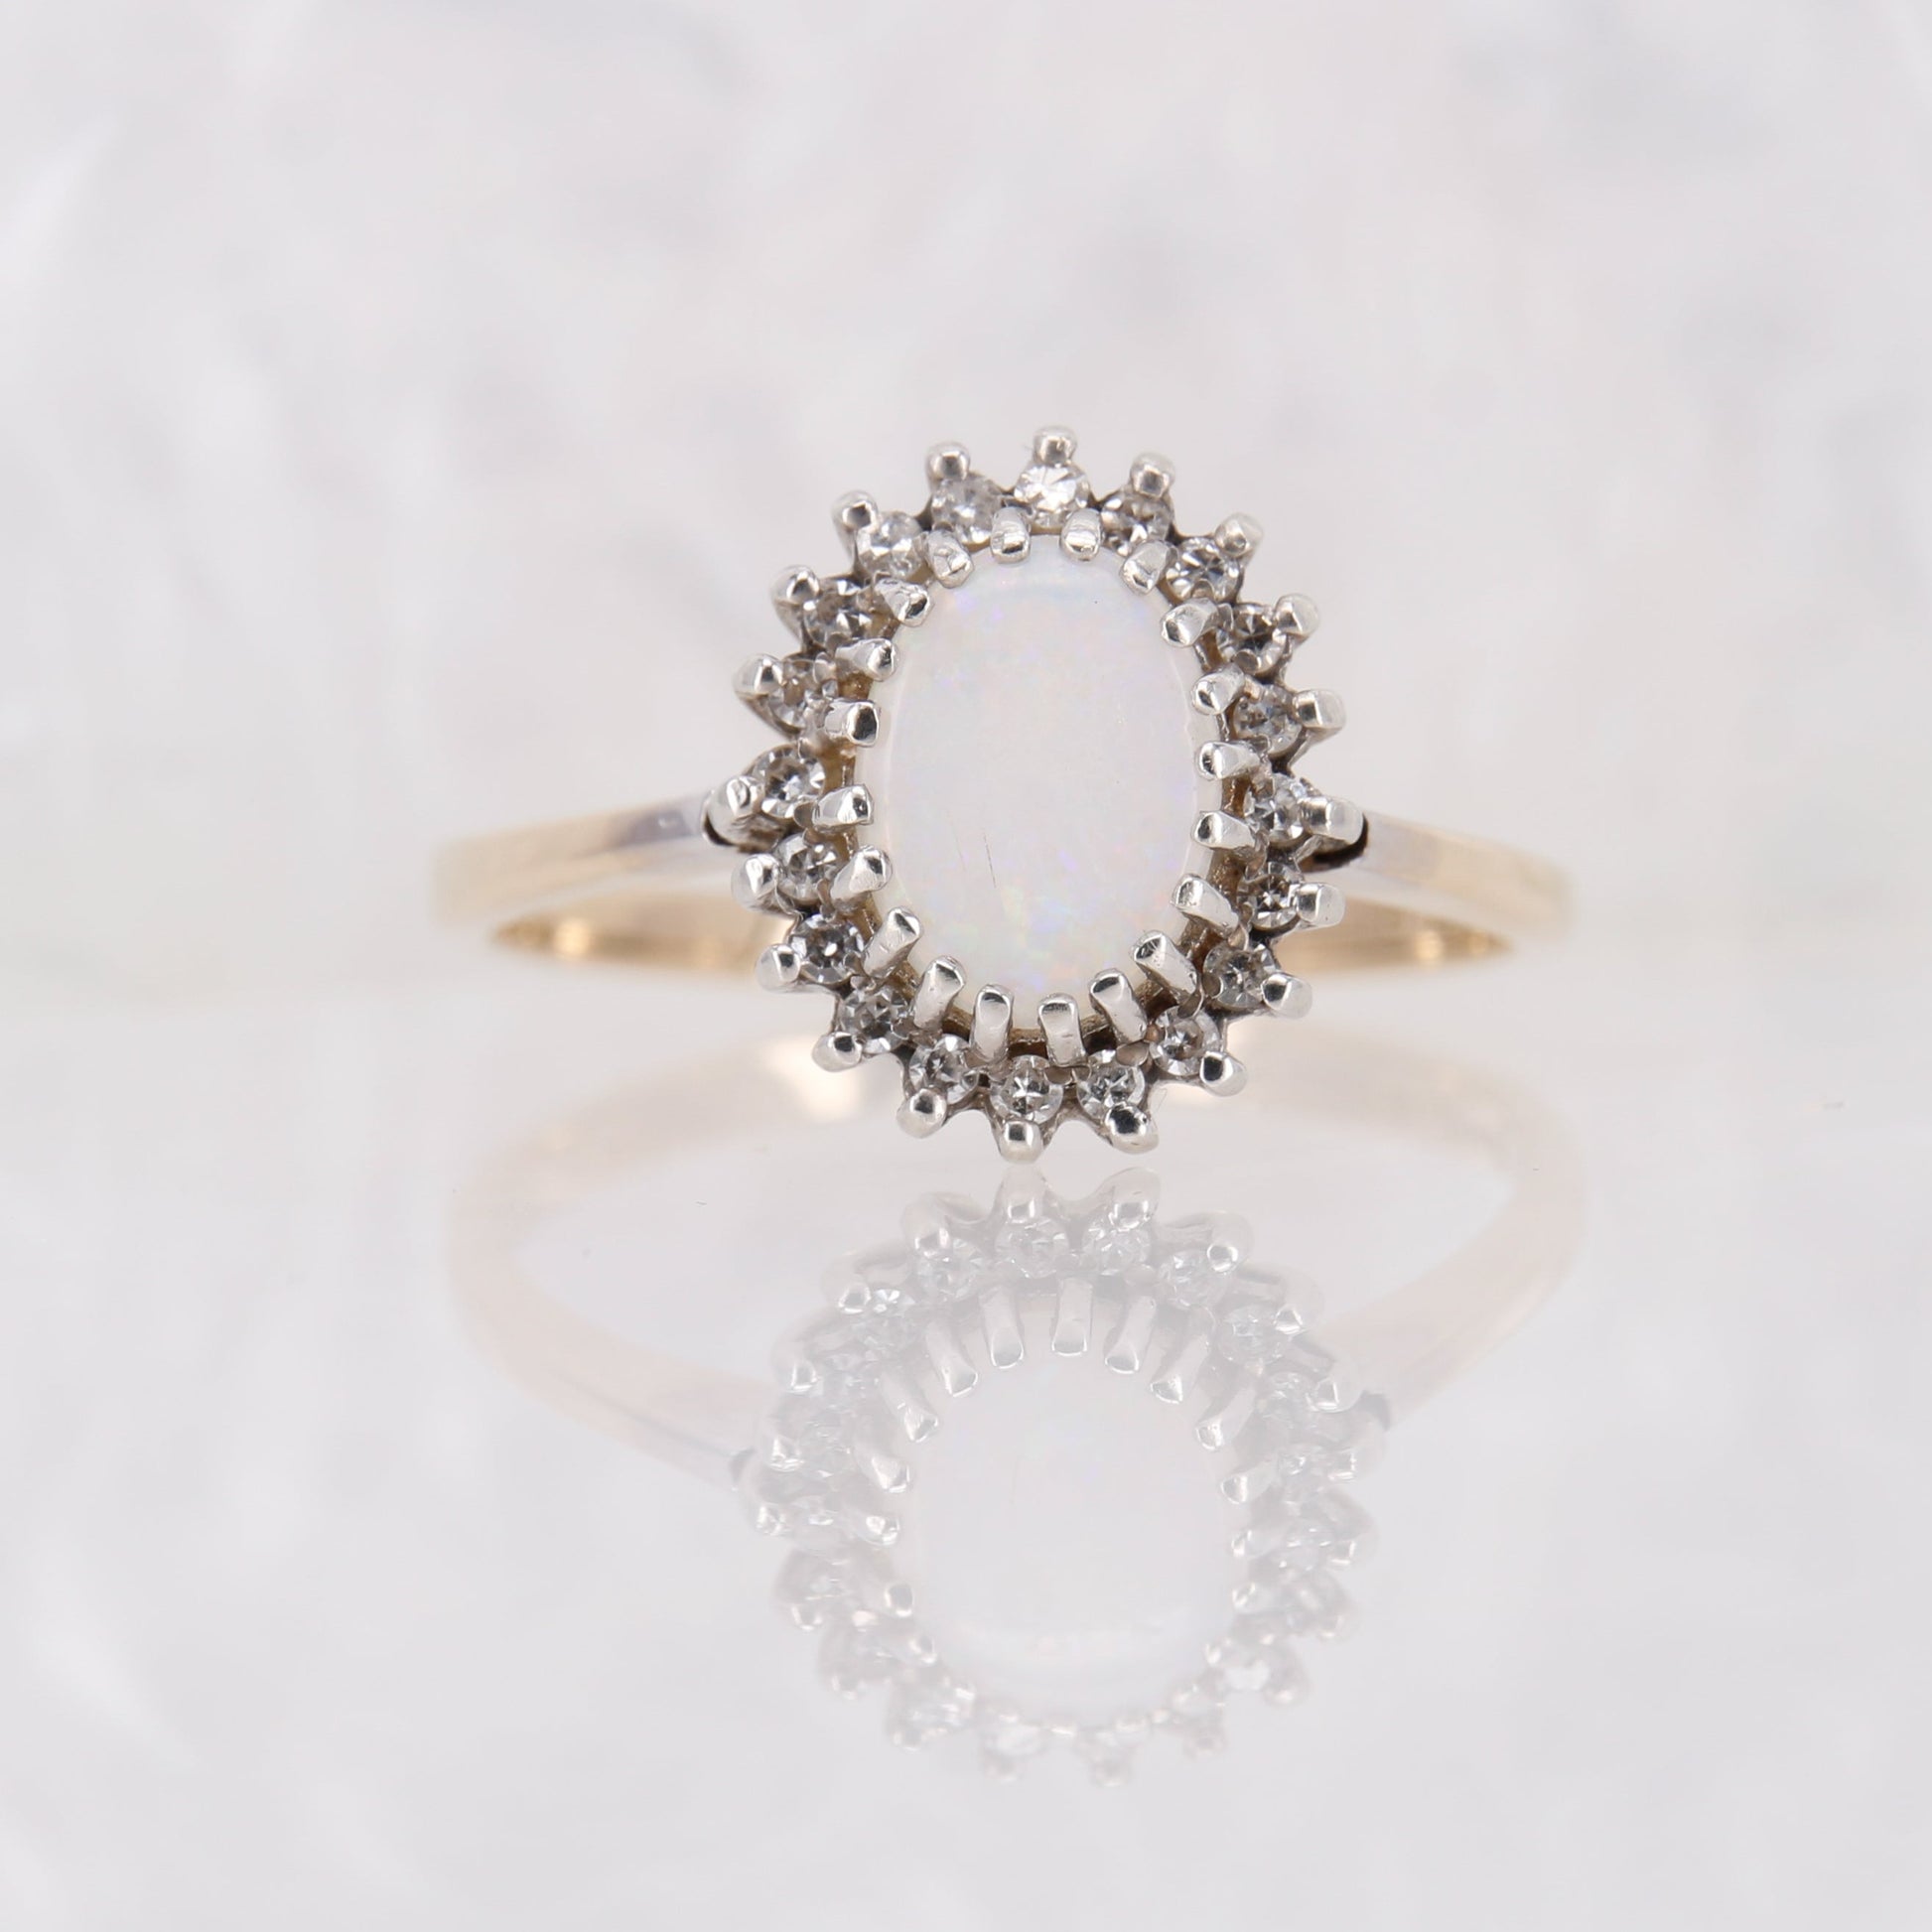 Vintage Opal and Diamond Ring in yellow gold. Secondhand white opal ring with a halo of diamonds.